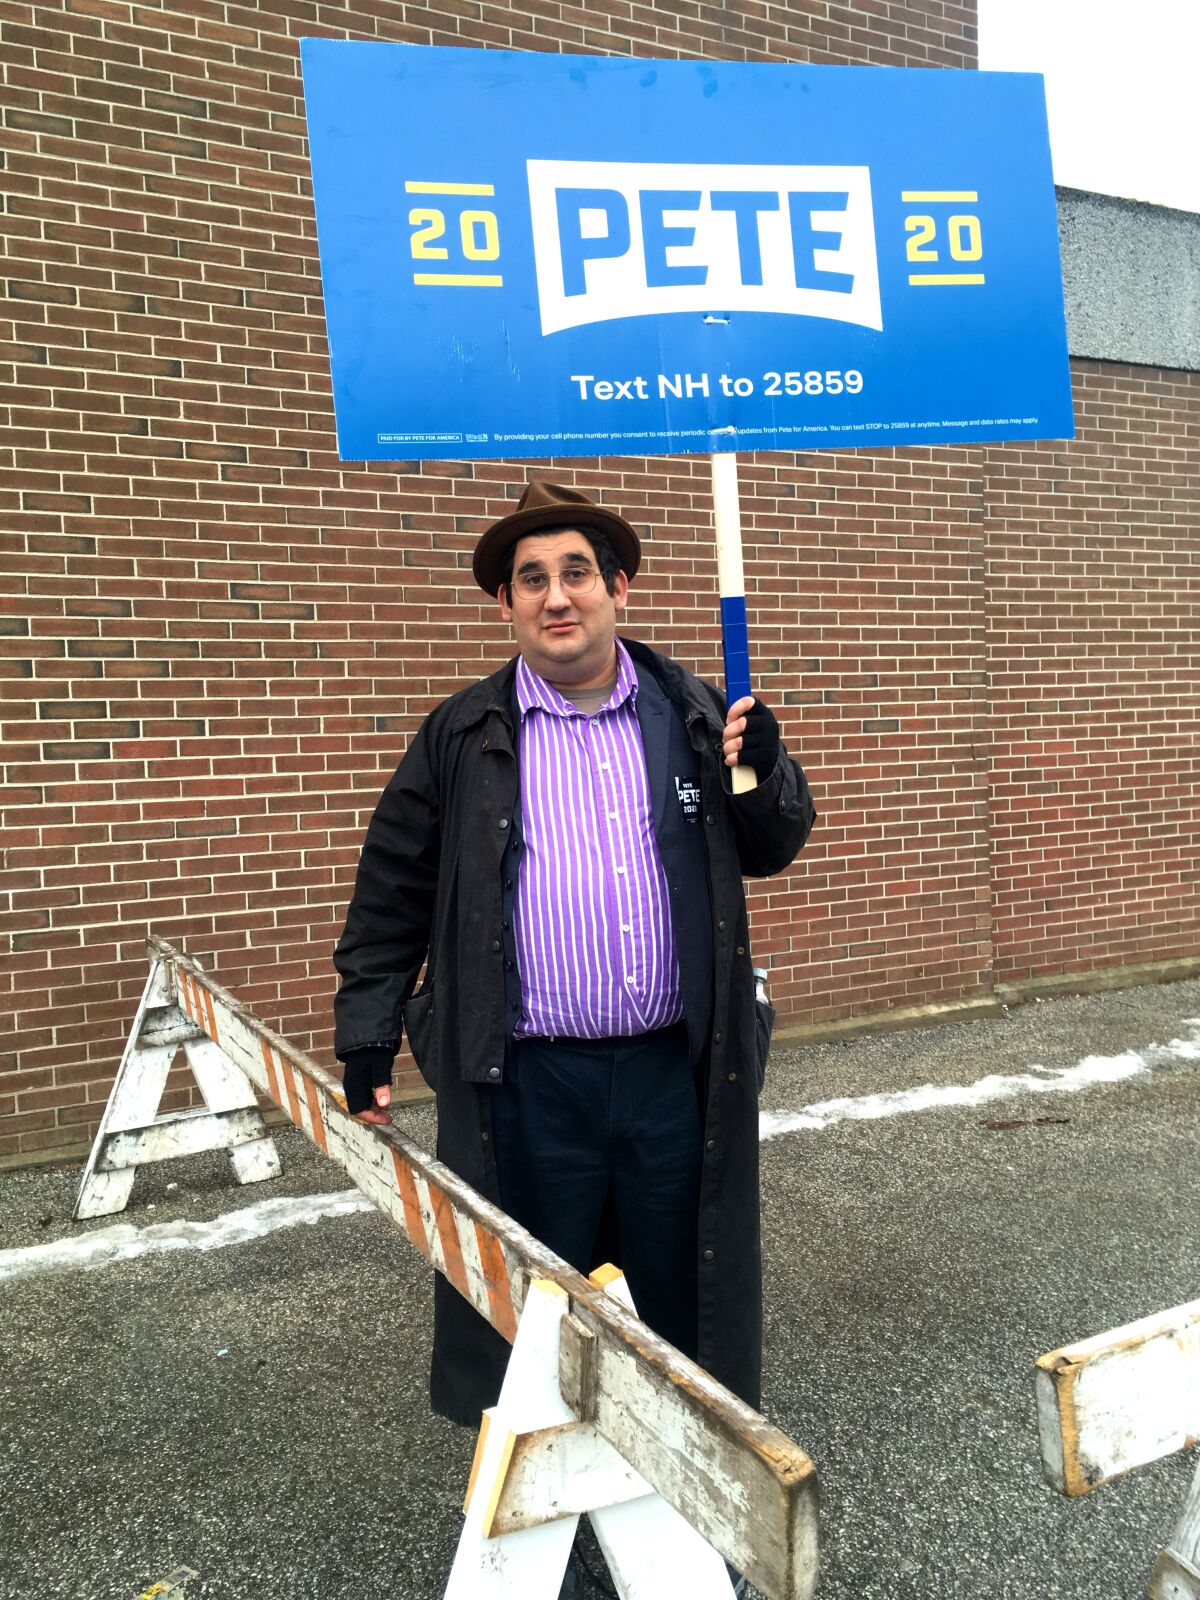 Zachary Kessin, a 46-year-old software developer, traveled to Manchester, N.H., from Massachusetts to support Pete Buttigieg.